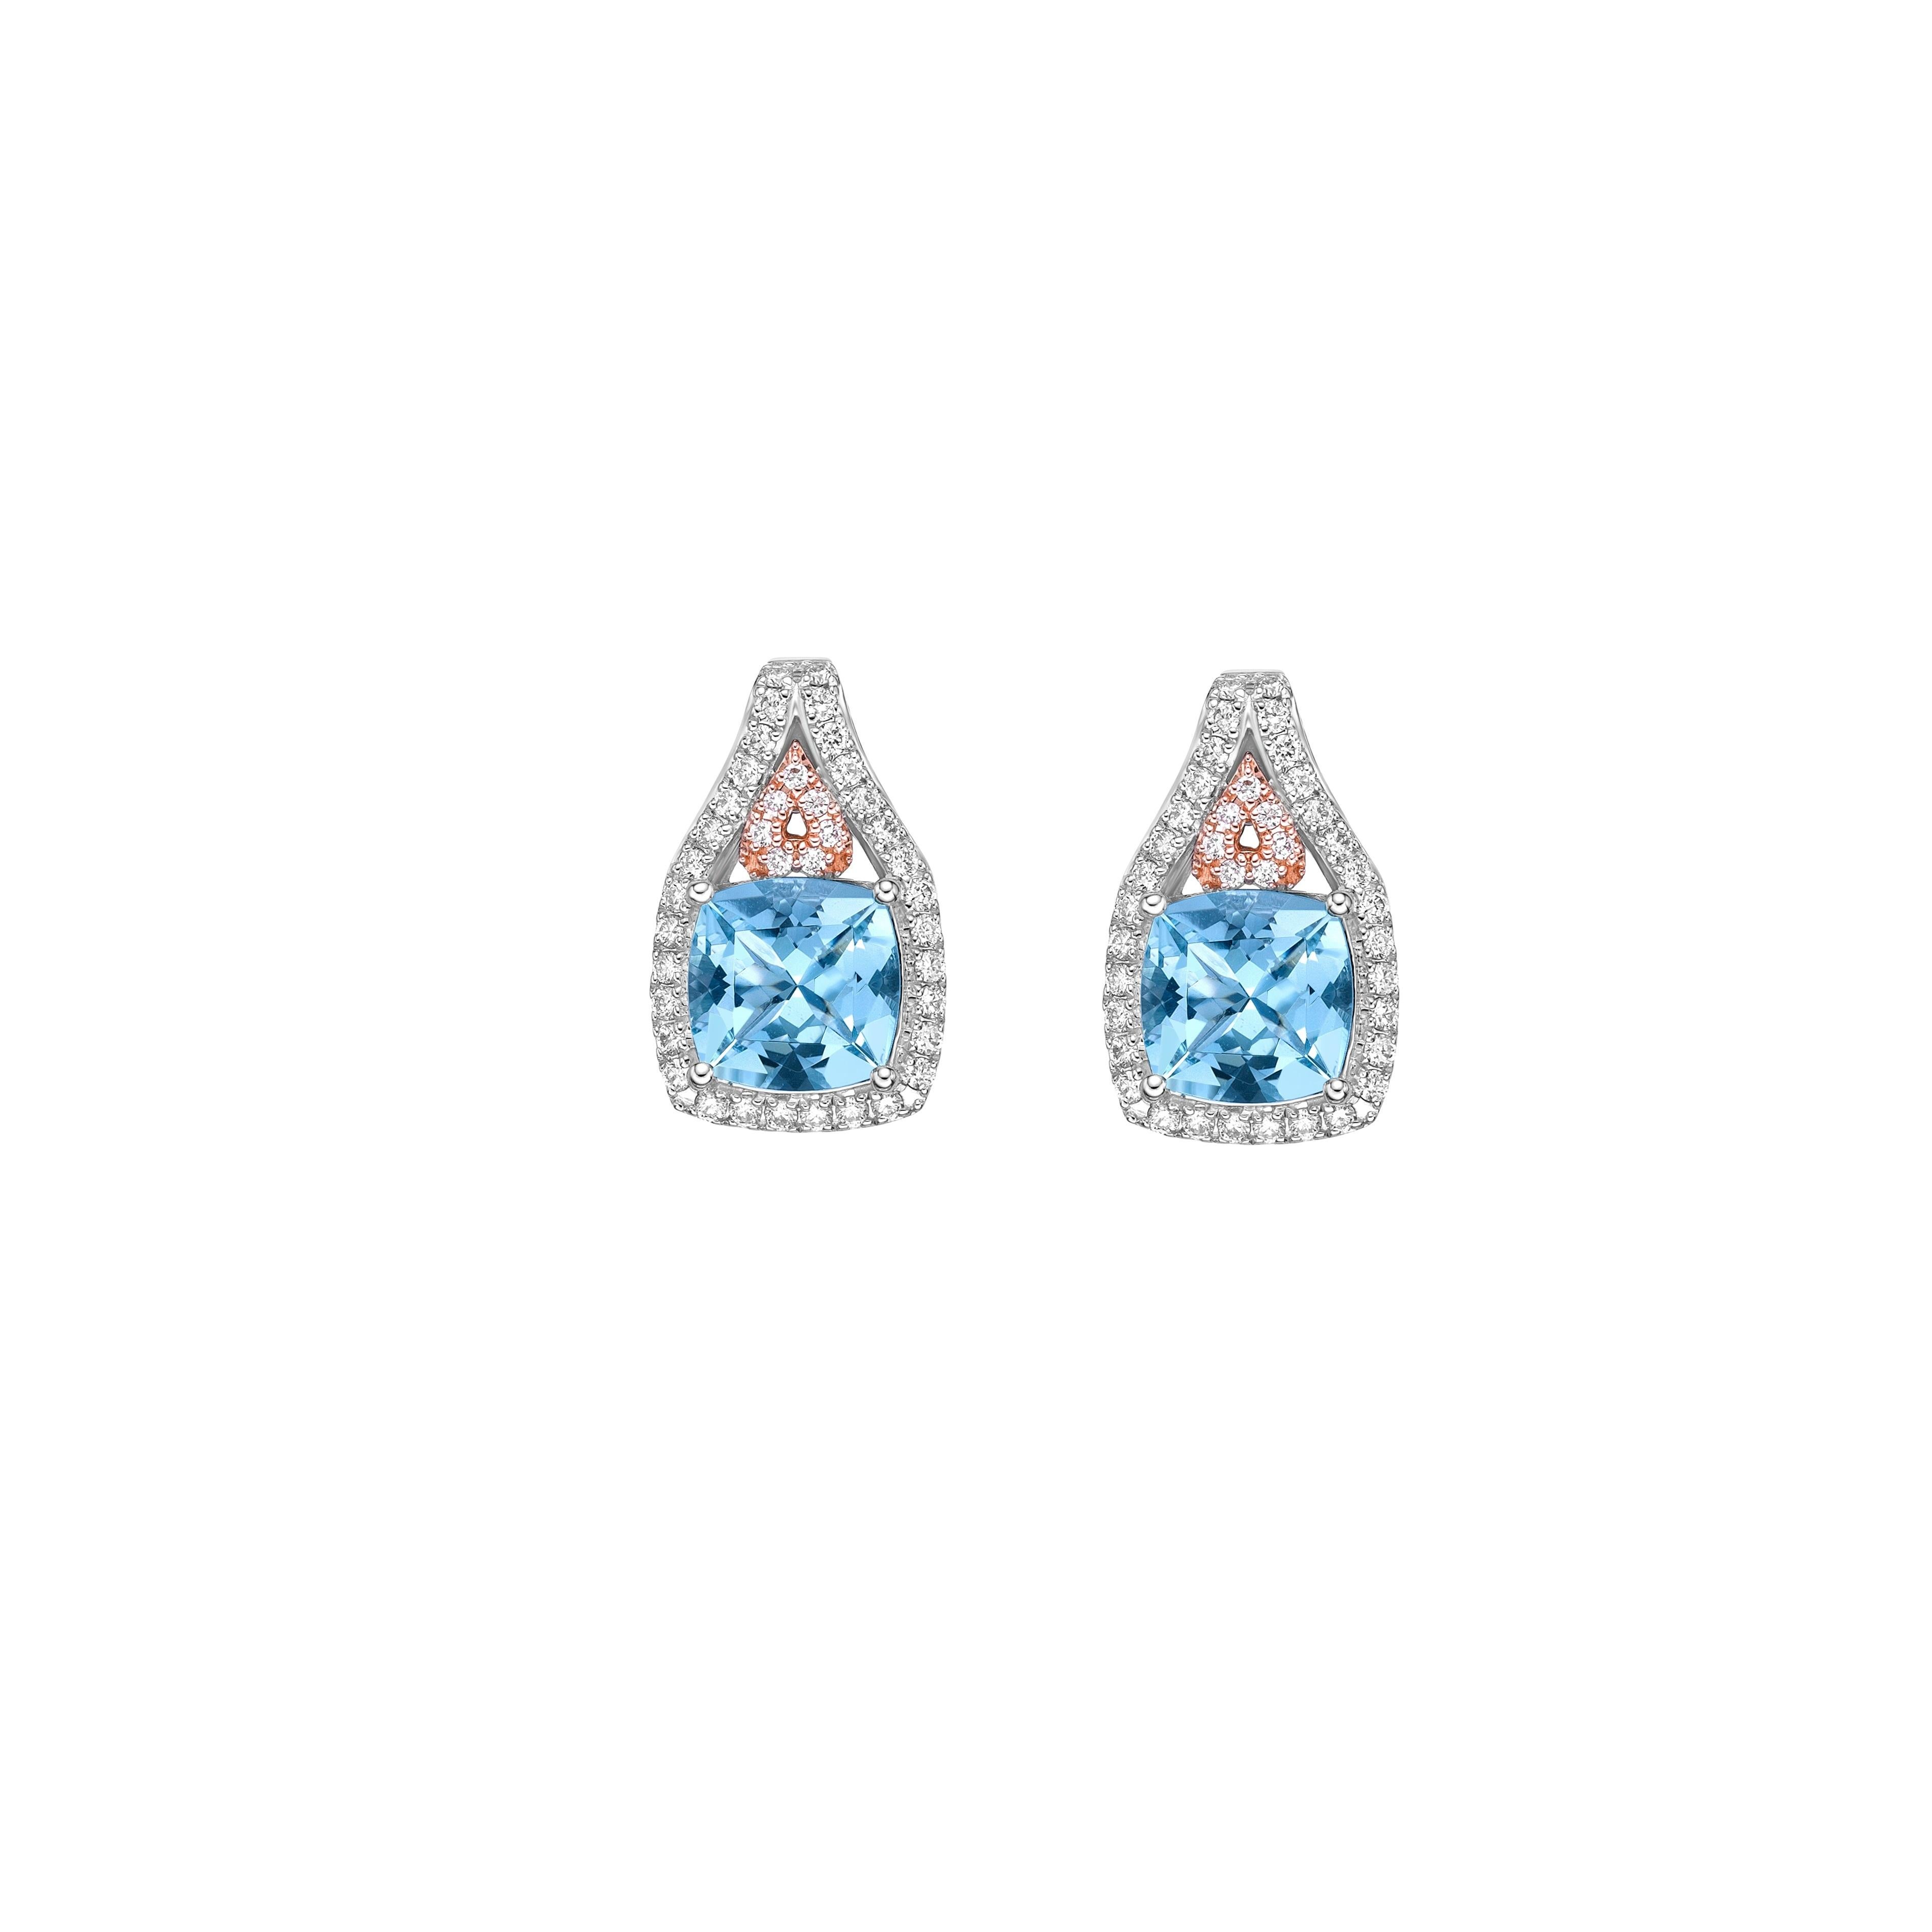 Contemporary 1.44 Carat Aquamarine Stud Earrings in 18Karat White Rose Gold with Diamond. For Sale